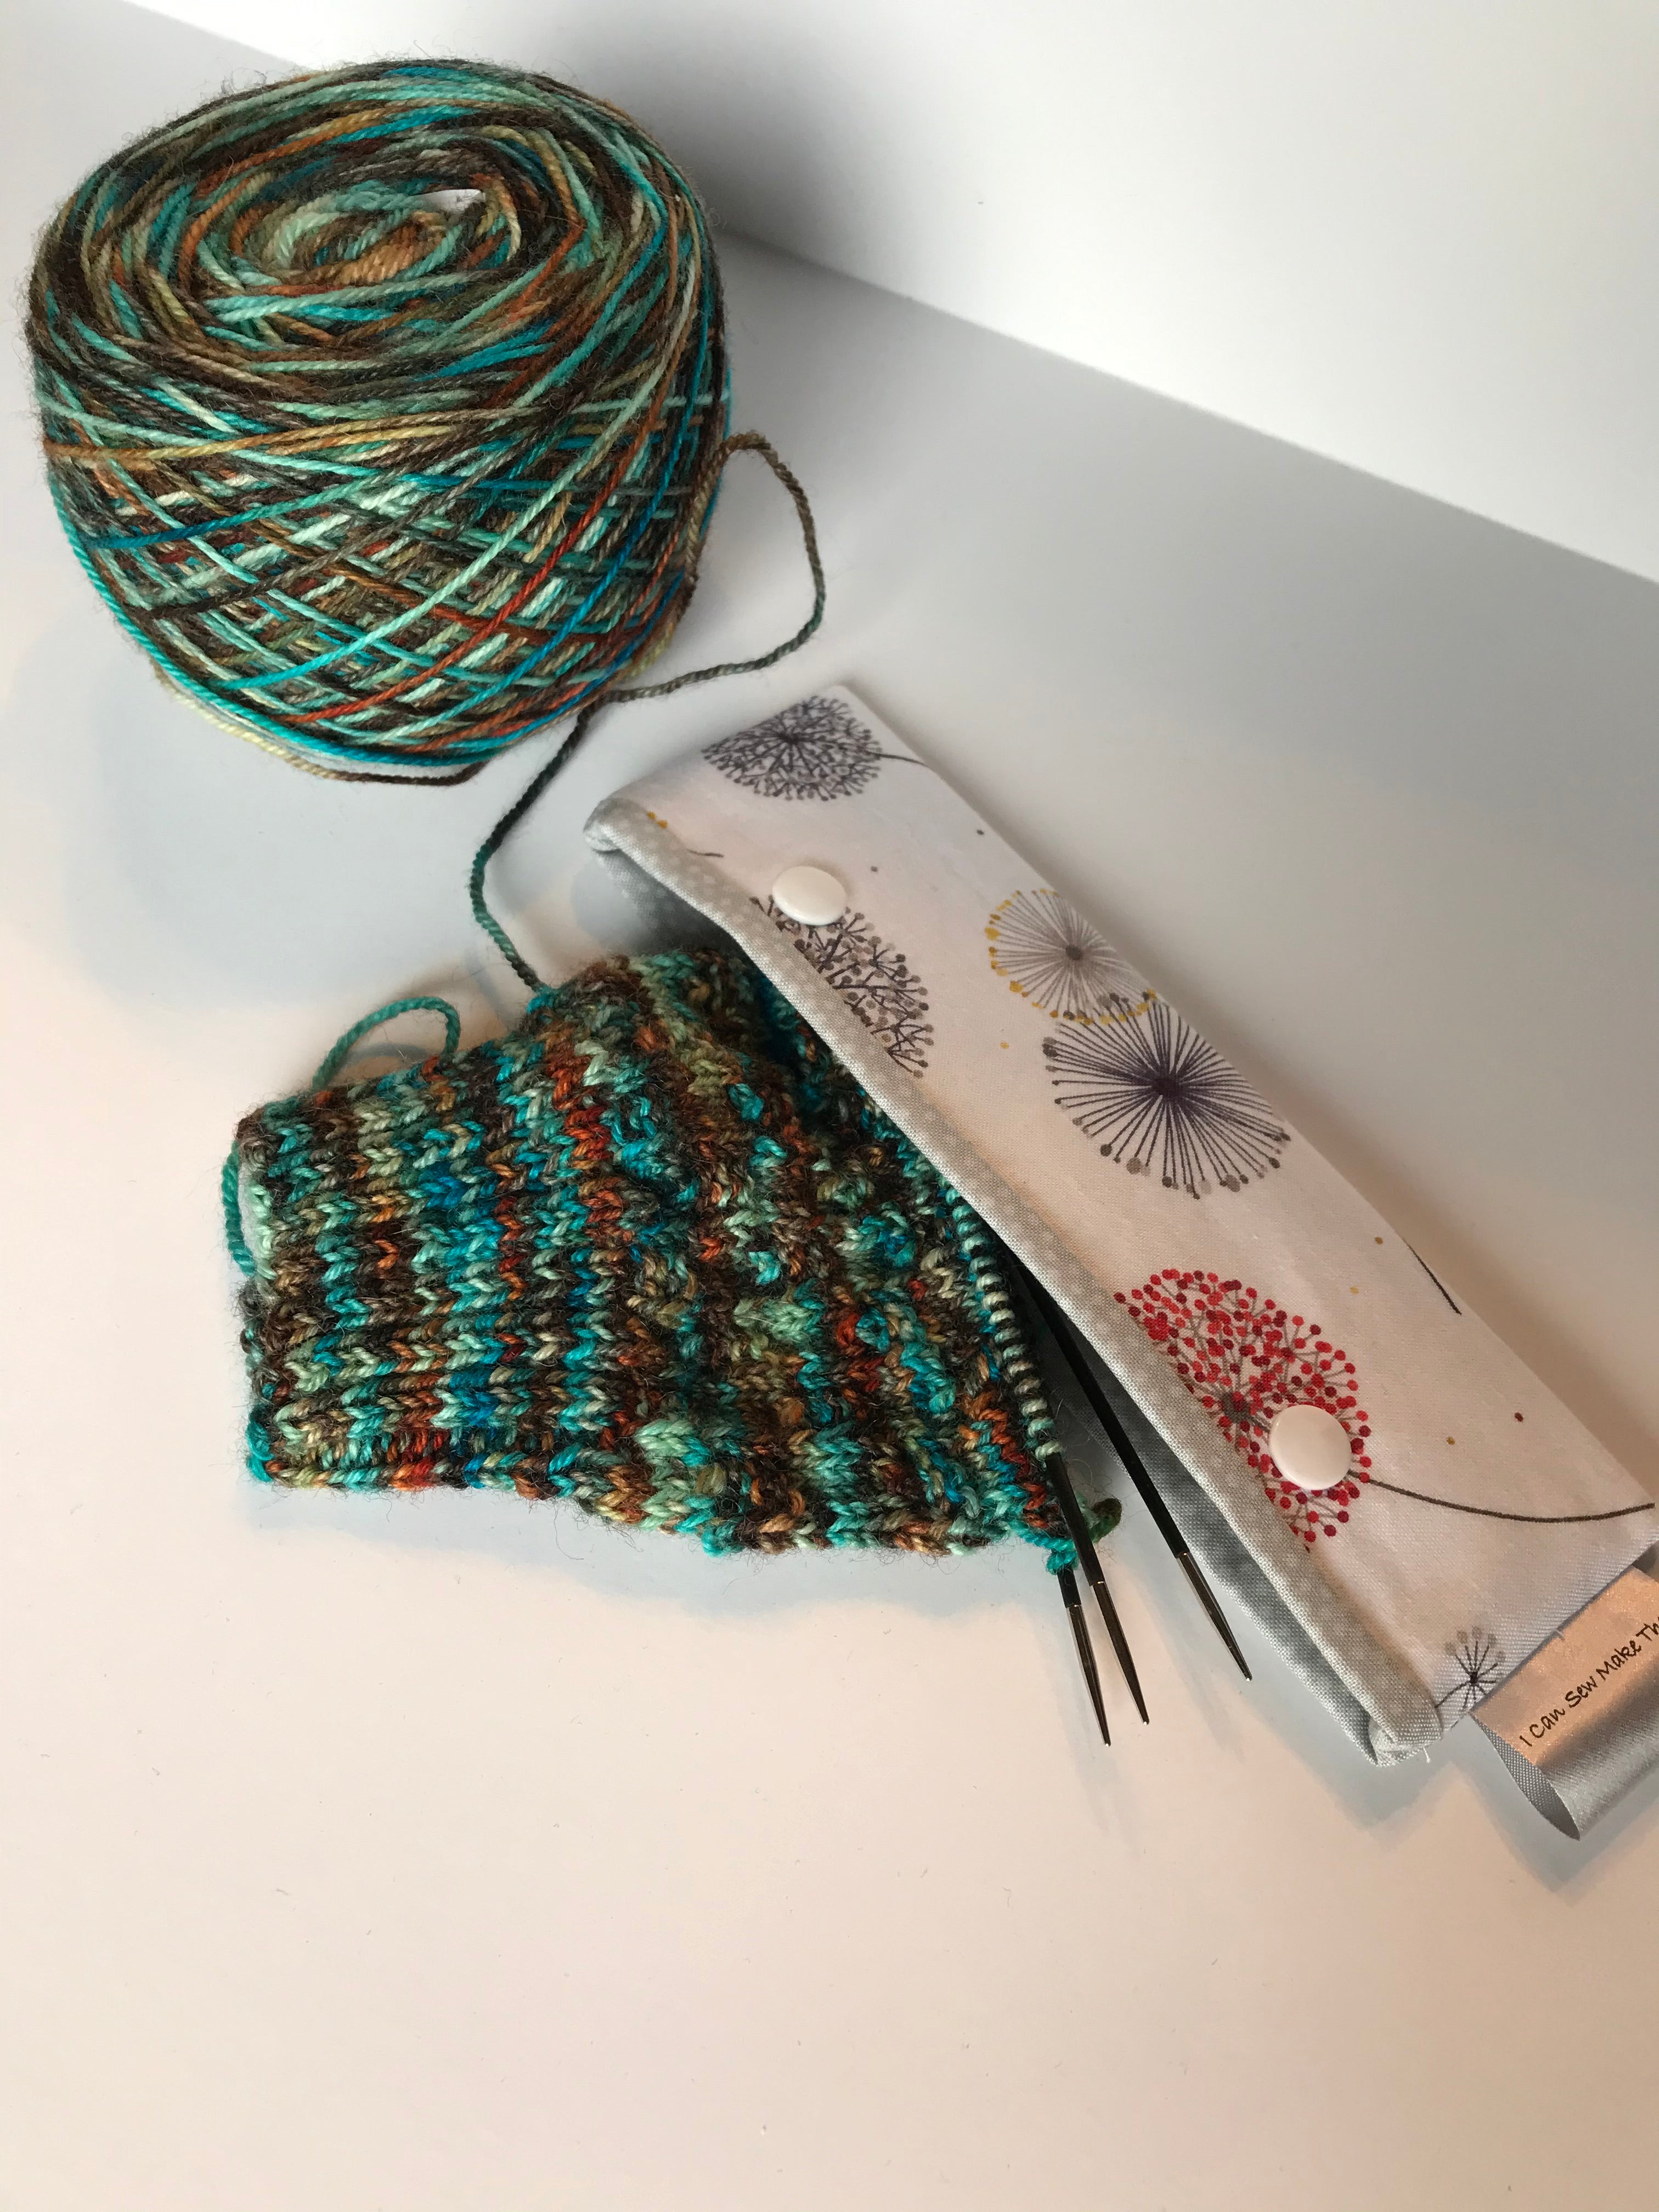 DPN Holder ( Double Pointed Needle) - Teal with orange/cream flowers